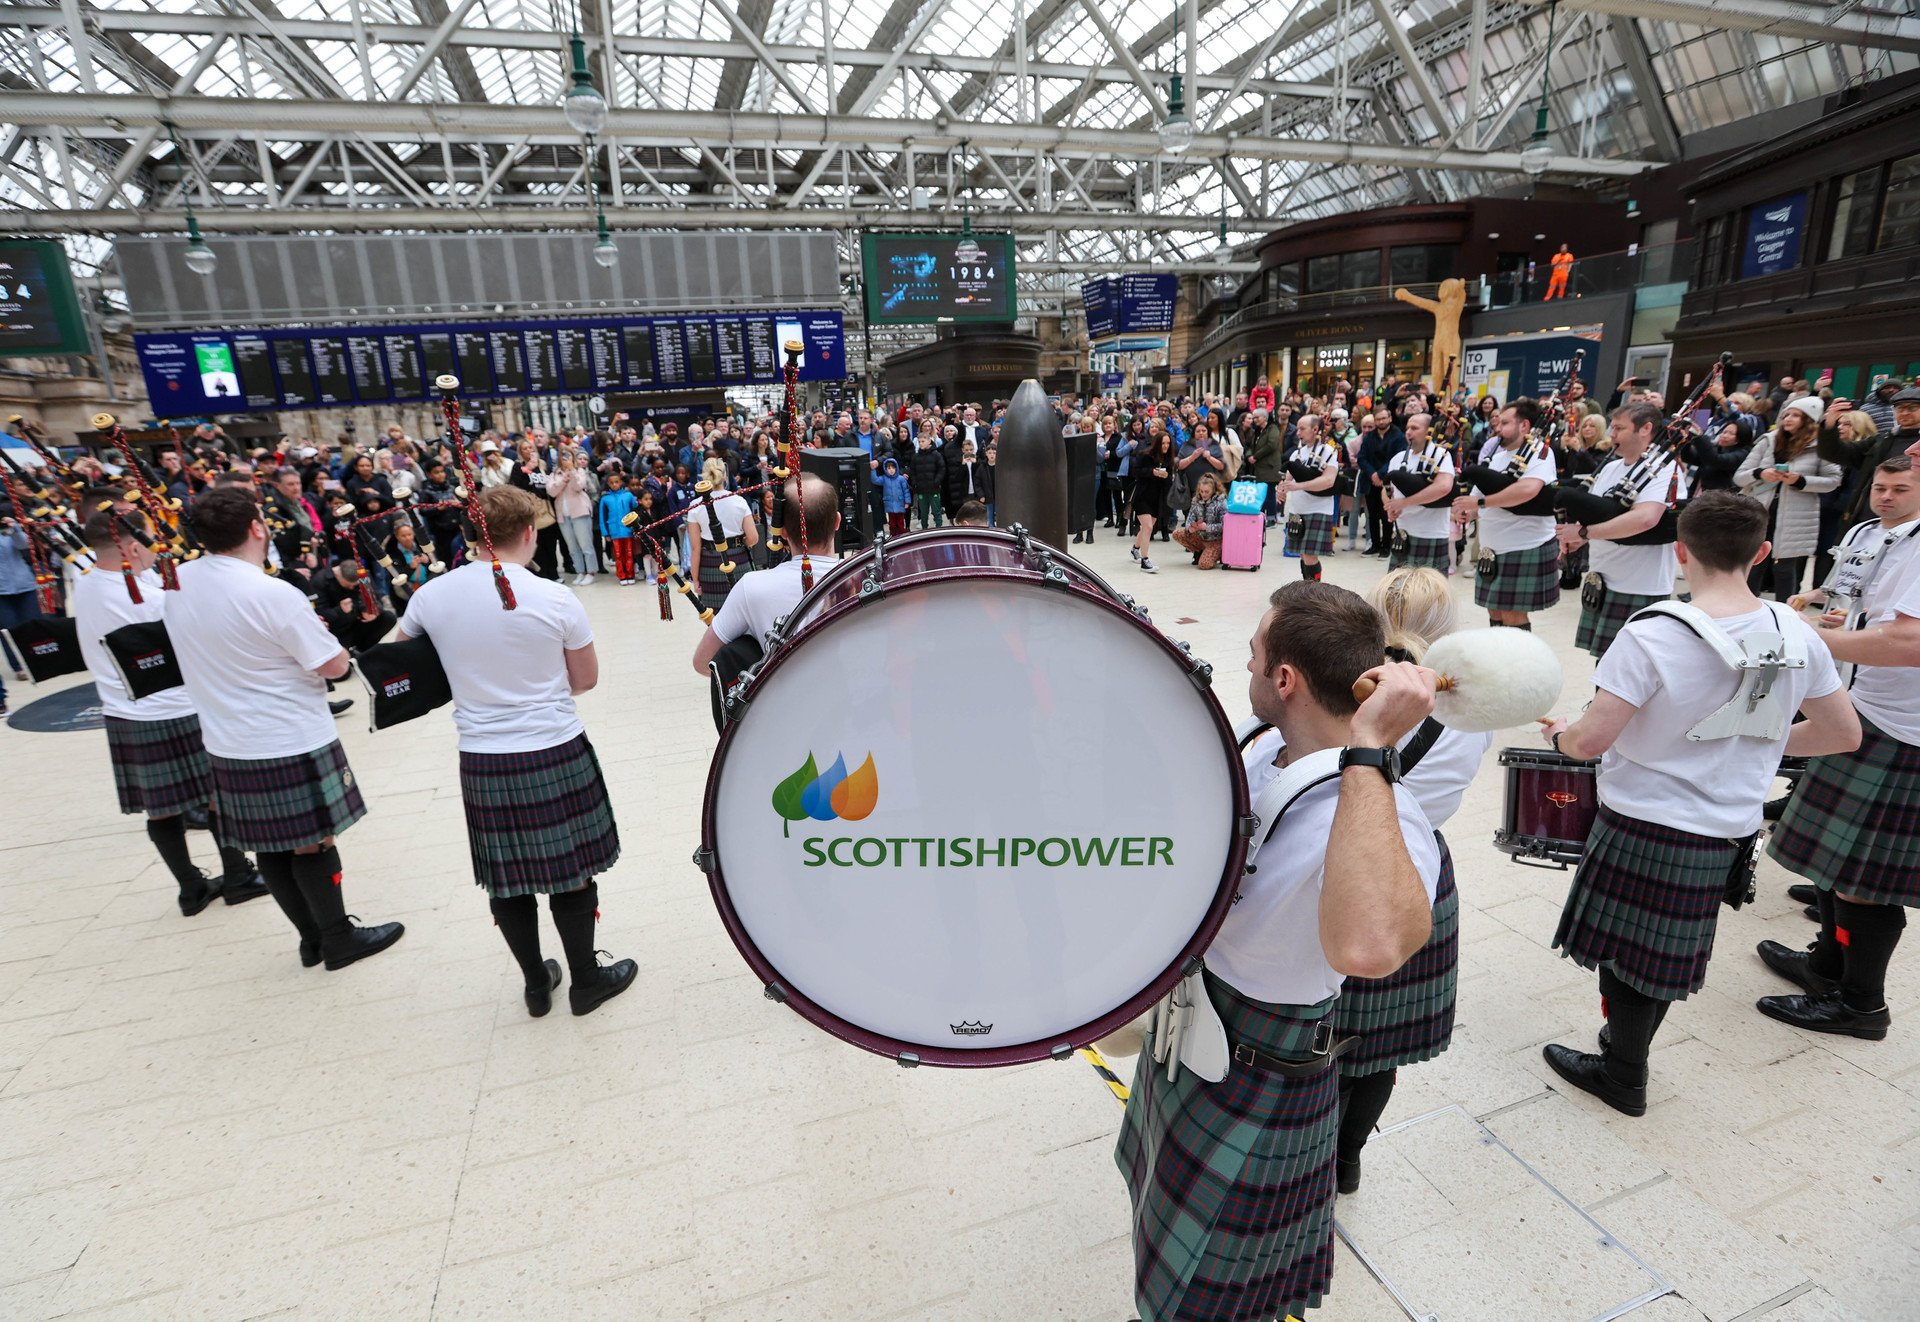 Members of Scottish Power's group conducted a live performance for commuters inside the station.